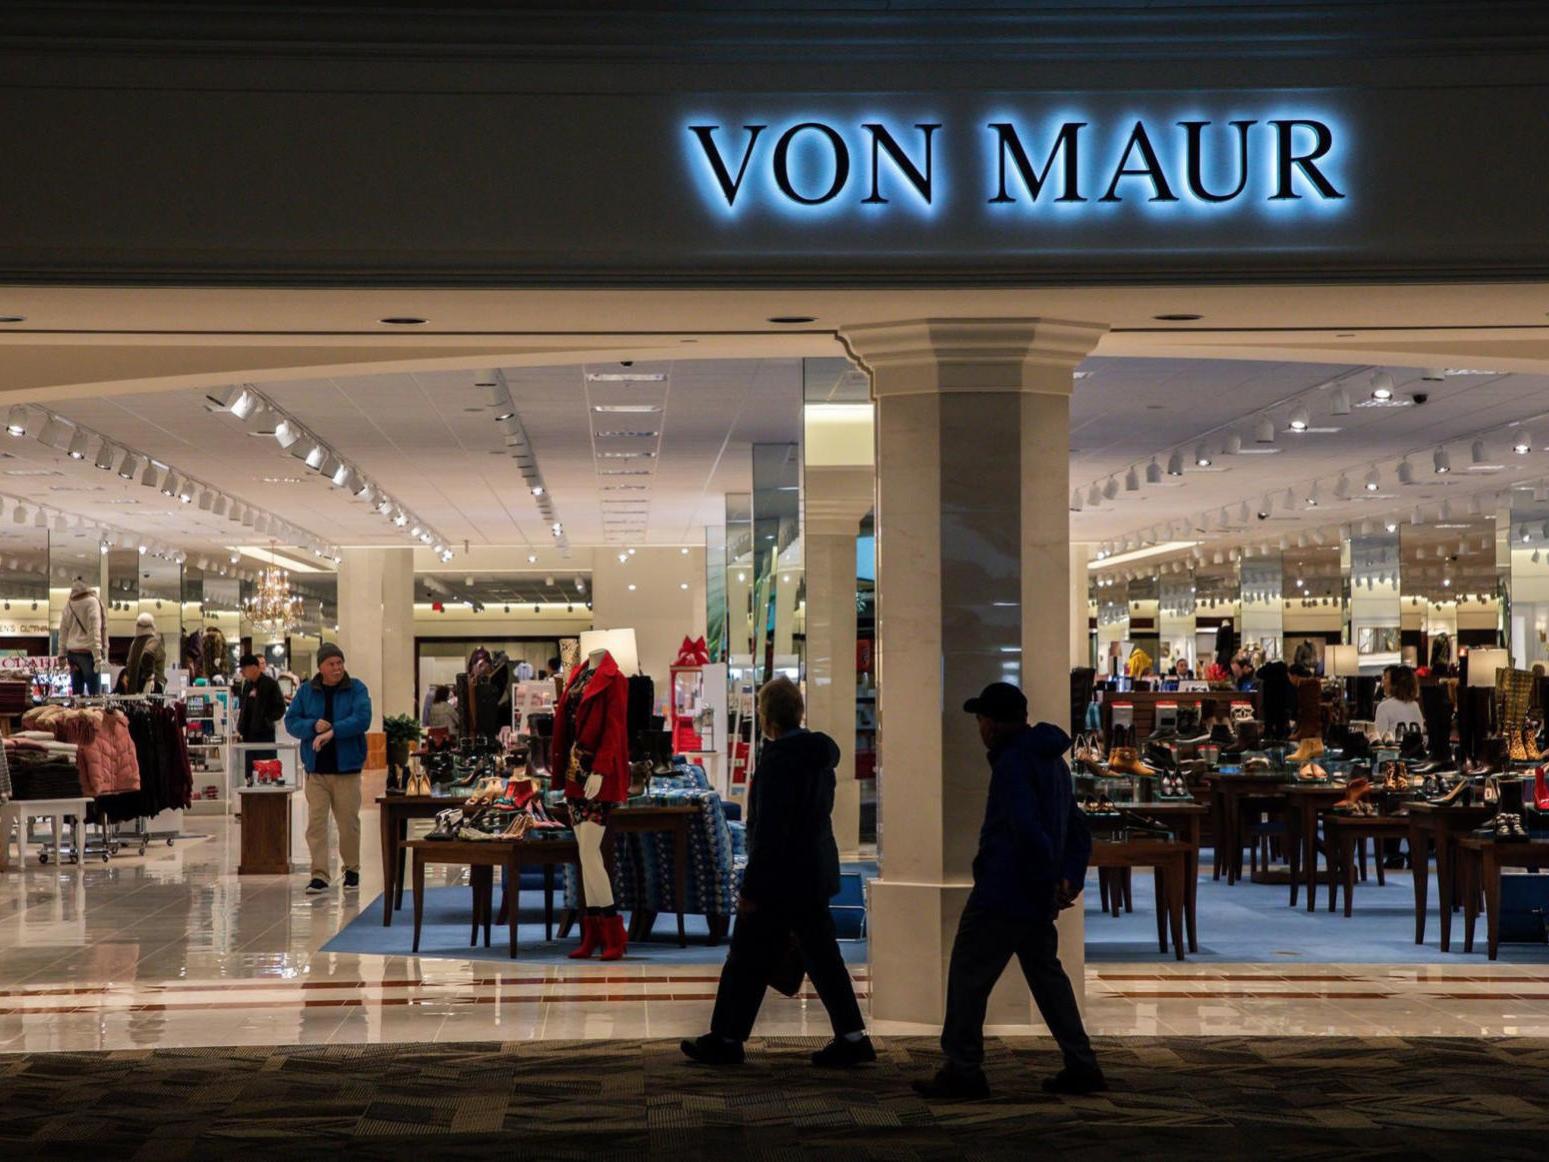 Here's Where Von Maur Will Open Its First Pennsylvania Location in